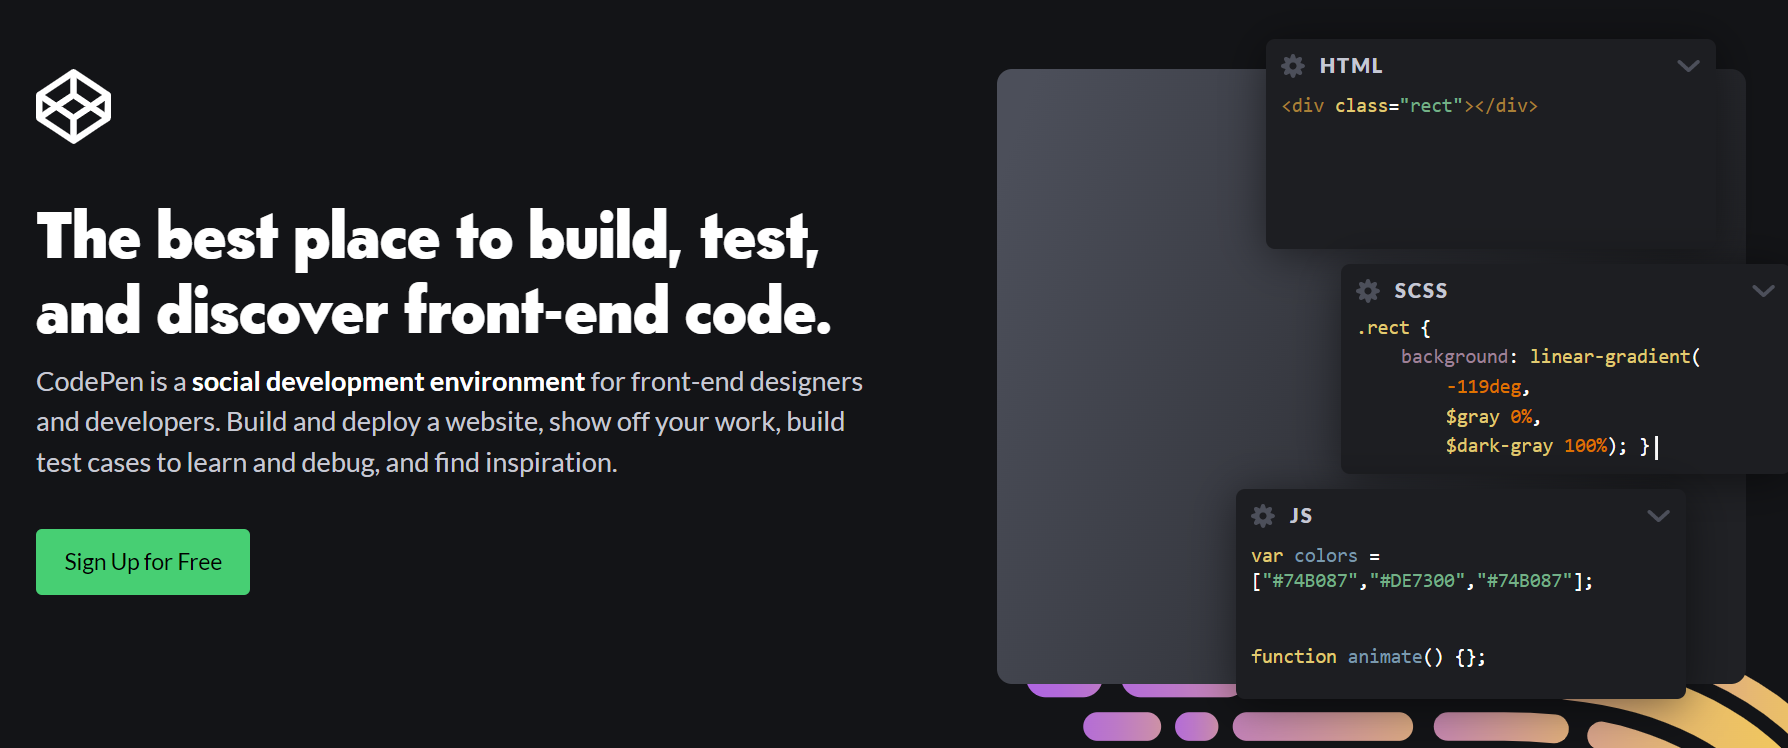 The CodePen homepage.